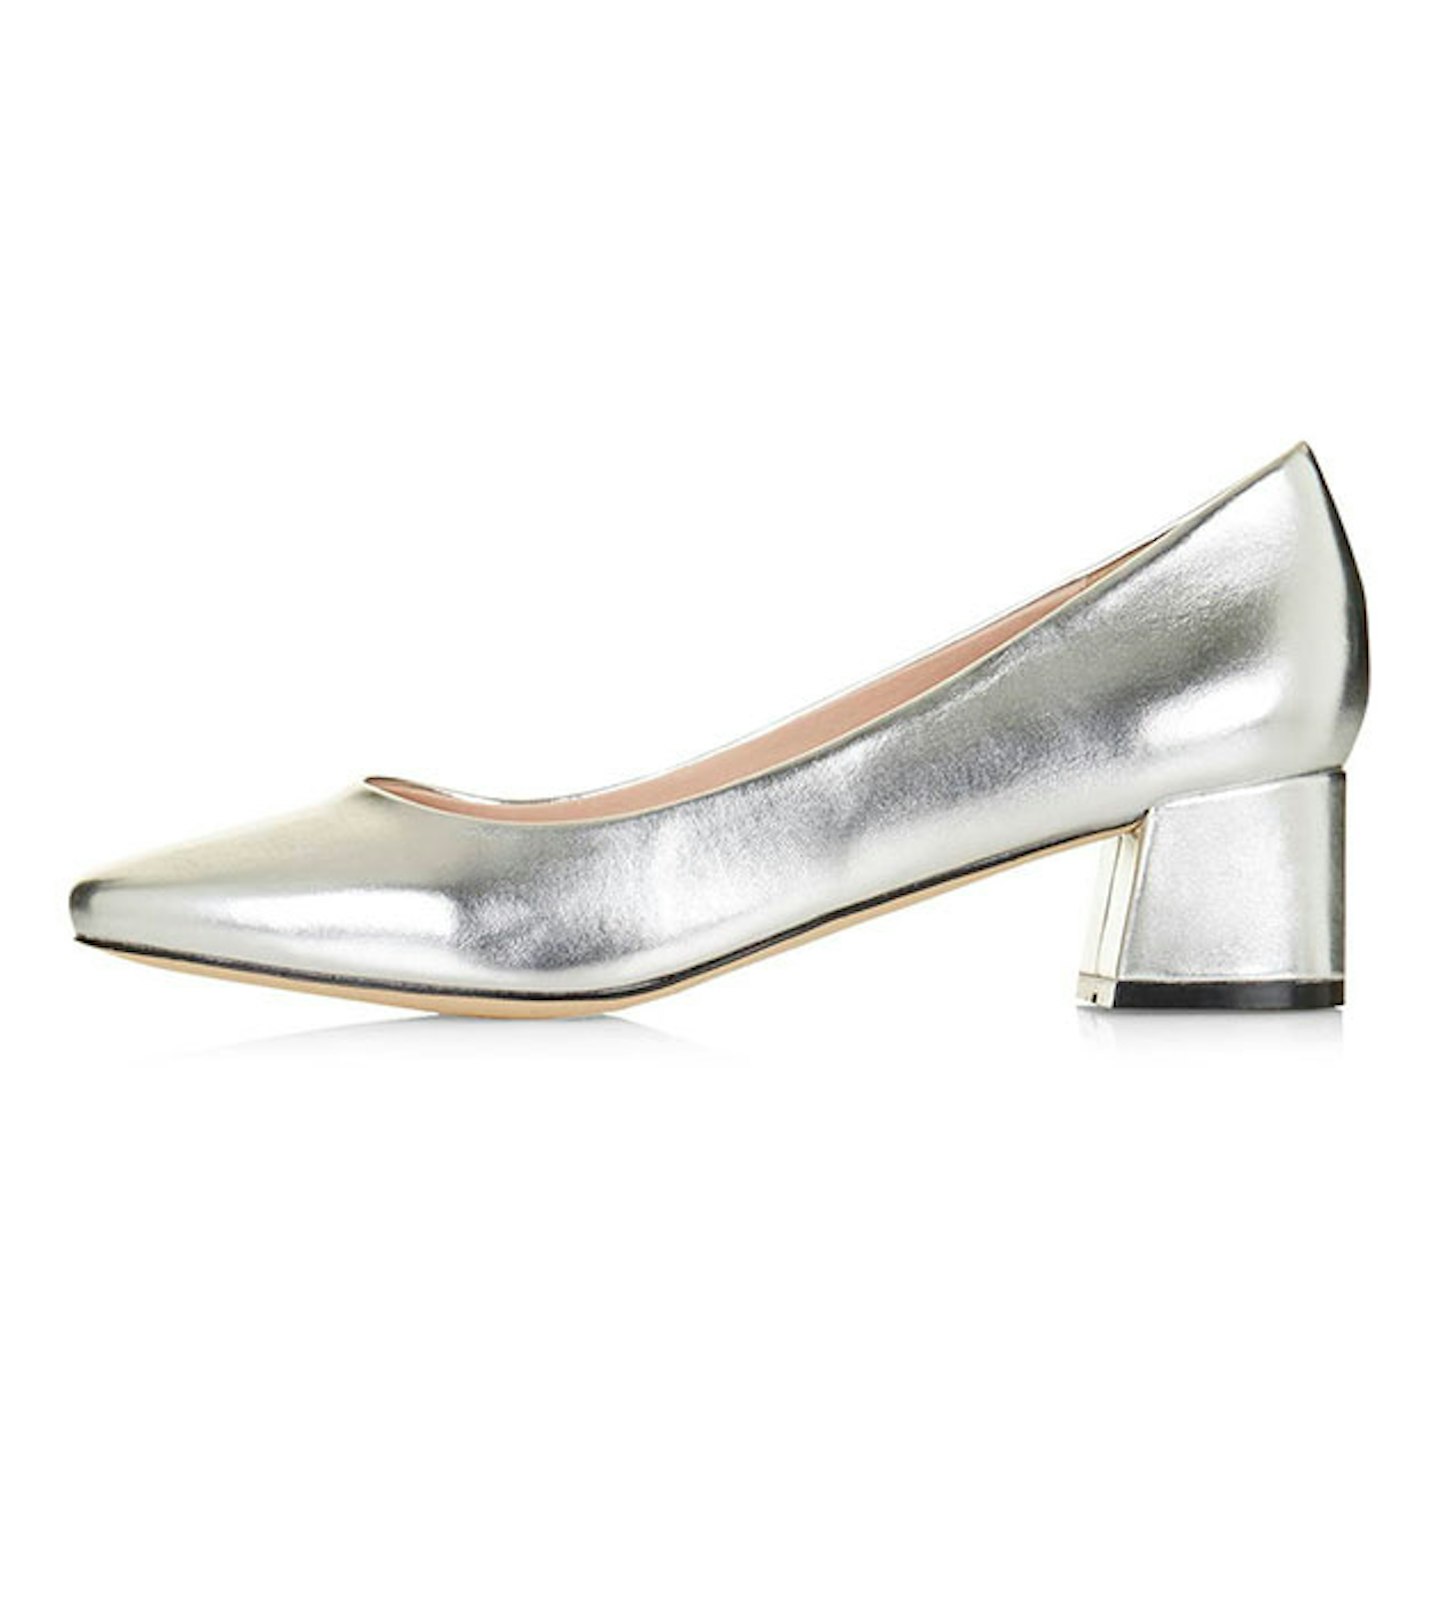 new shoes topshop silver heels